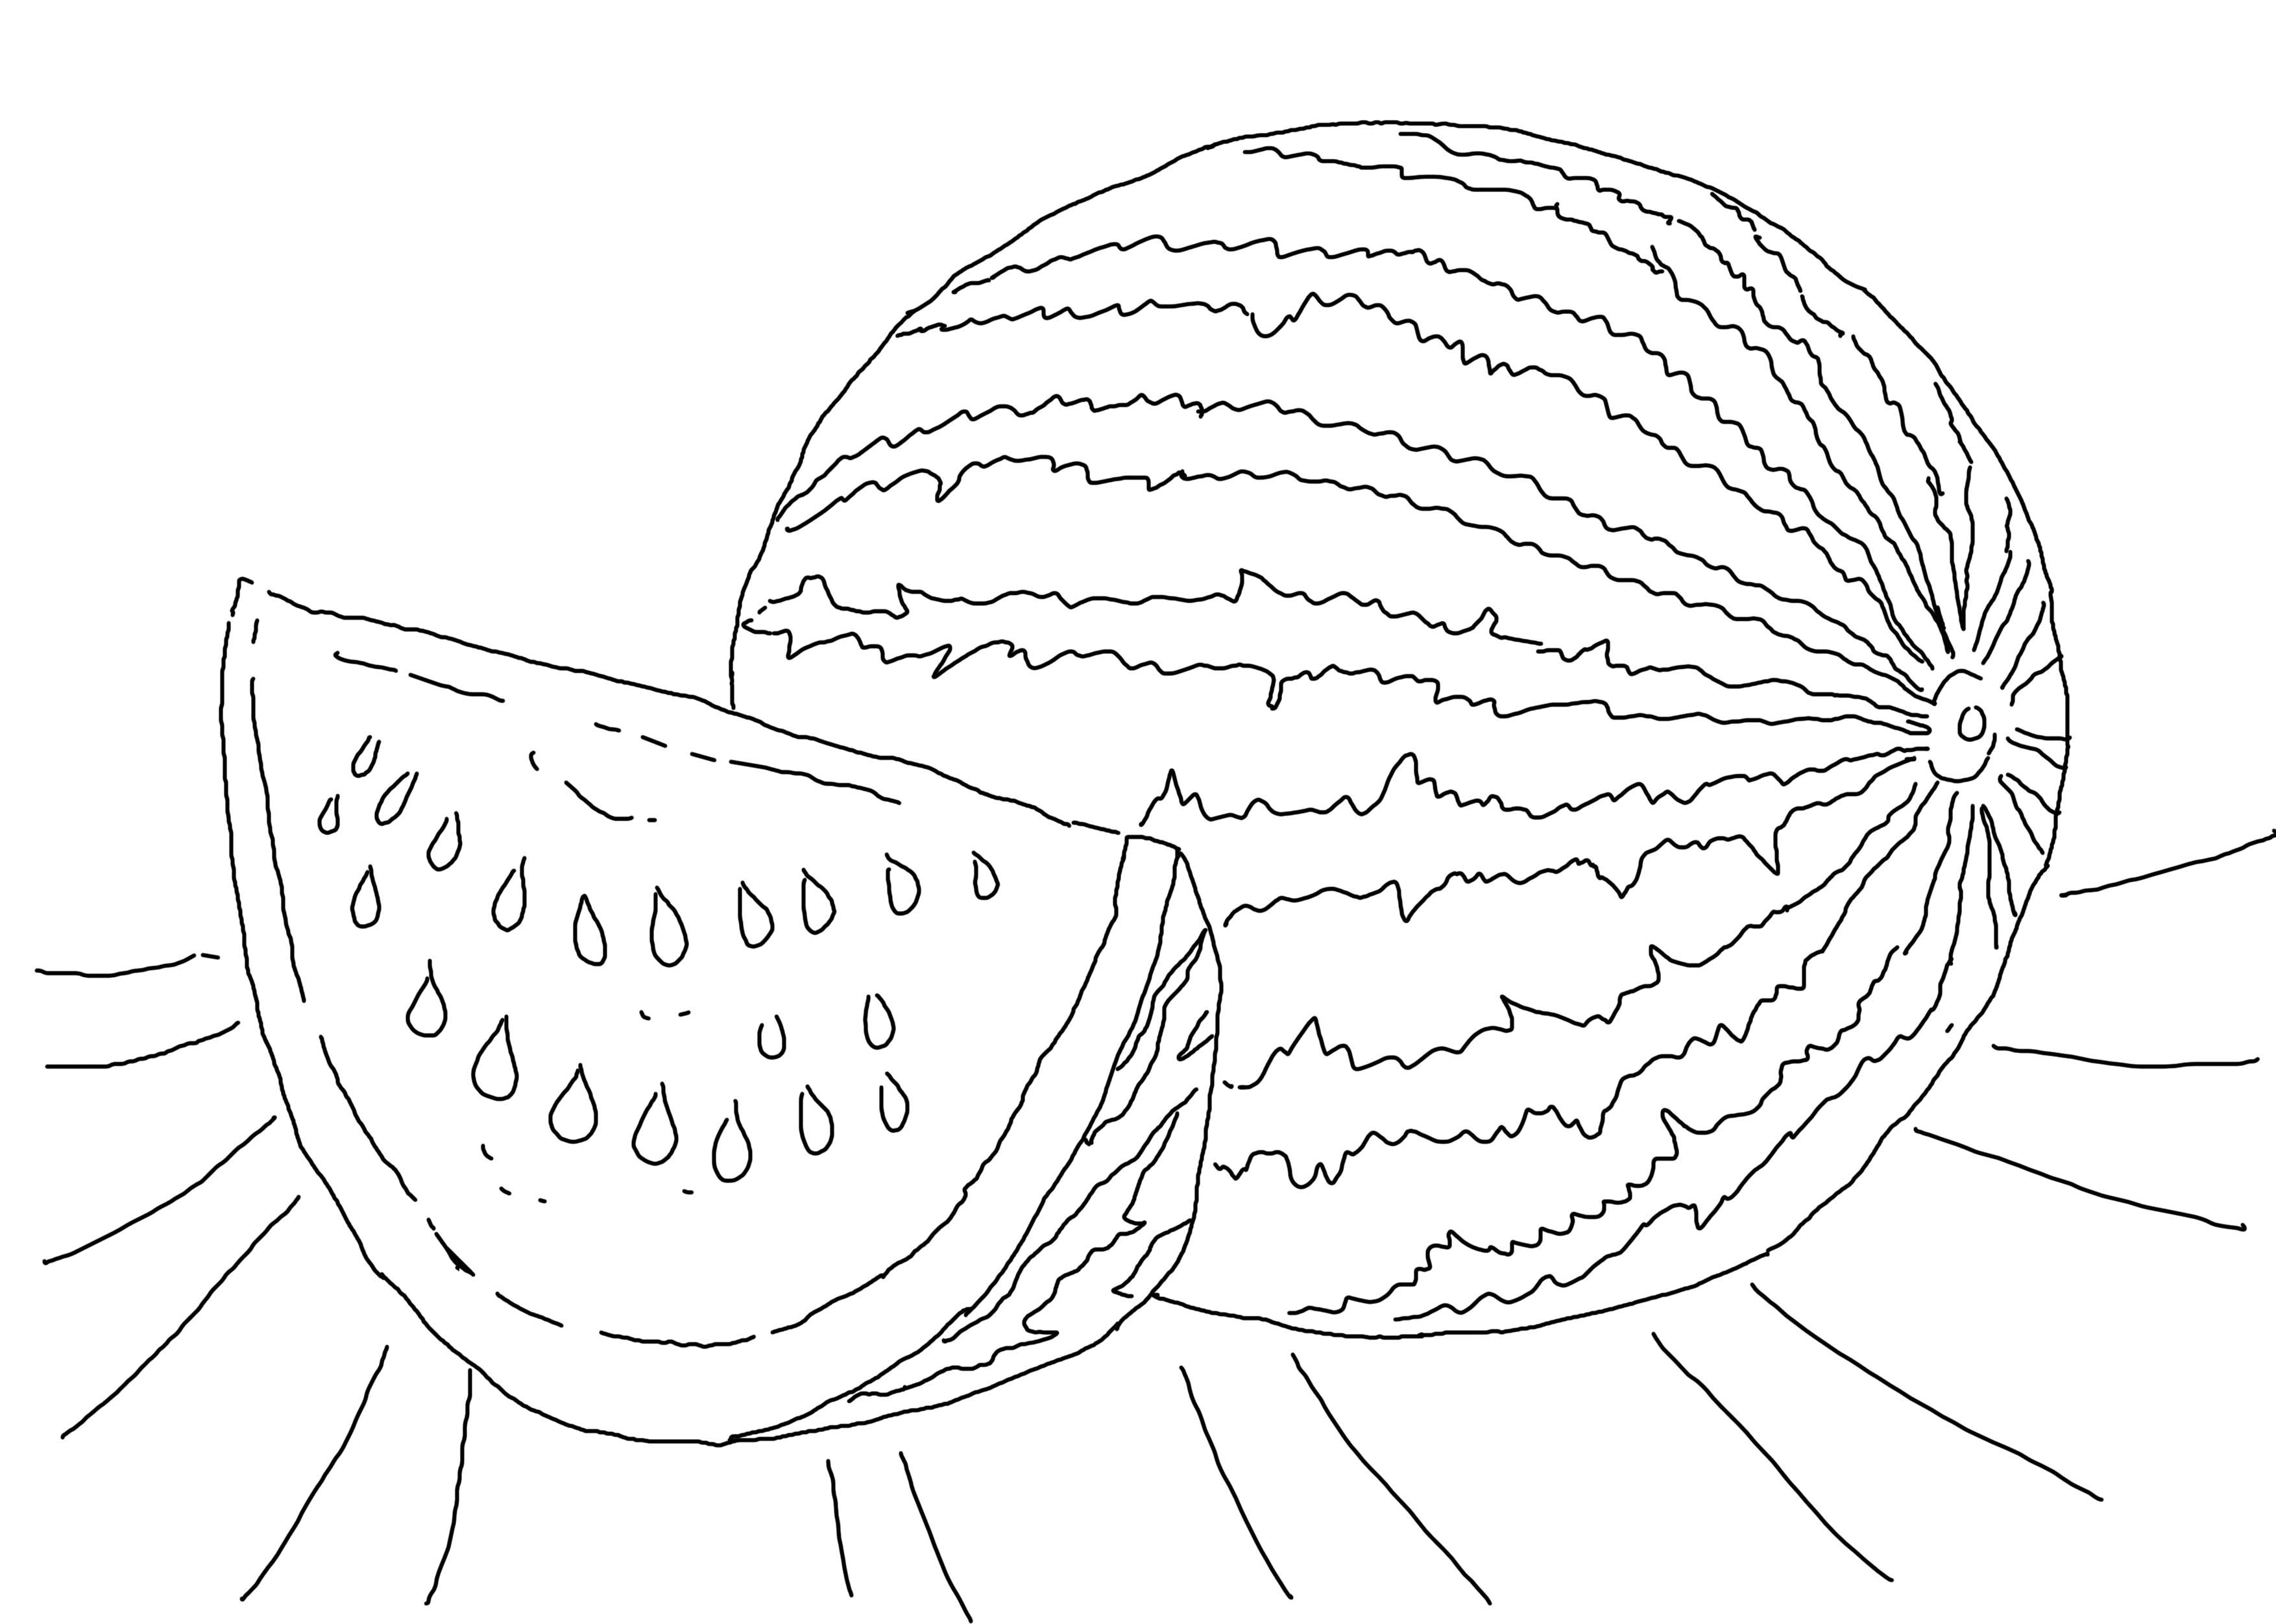 Watermelon coloring pages to download and print for free